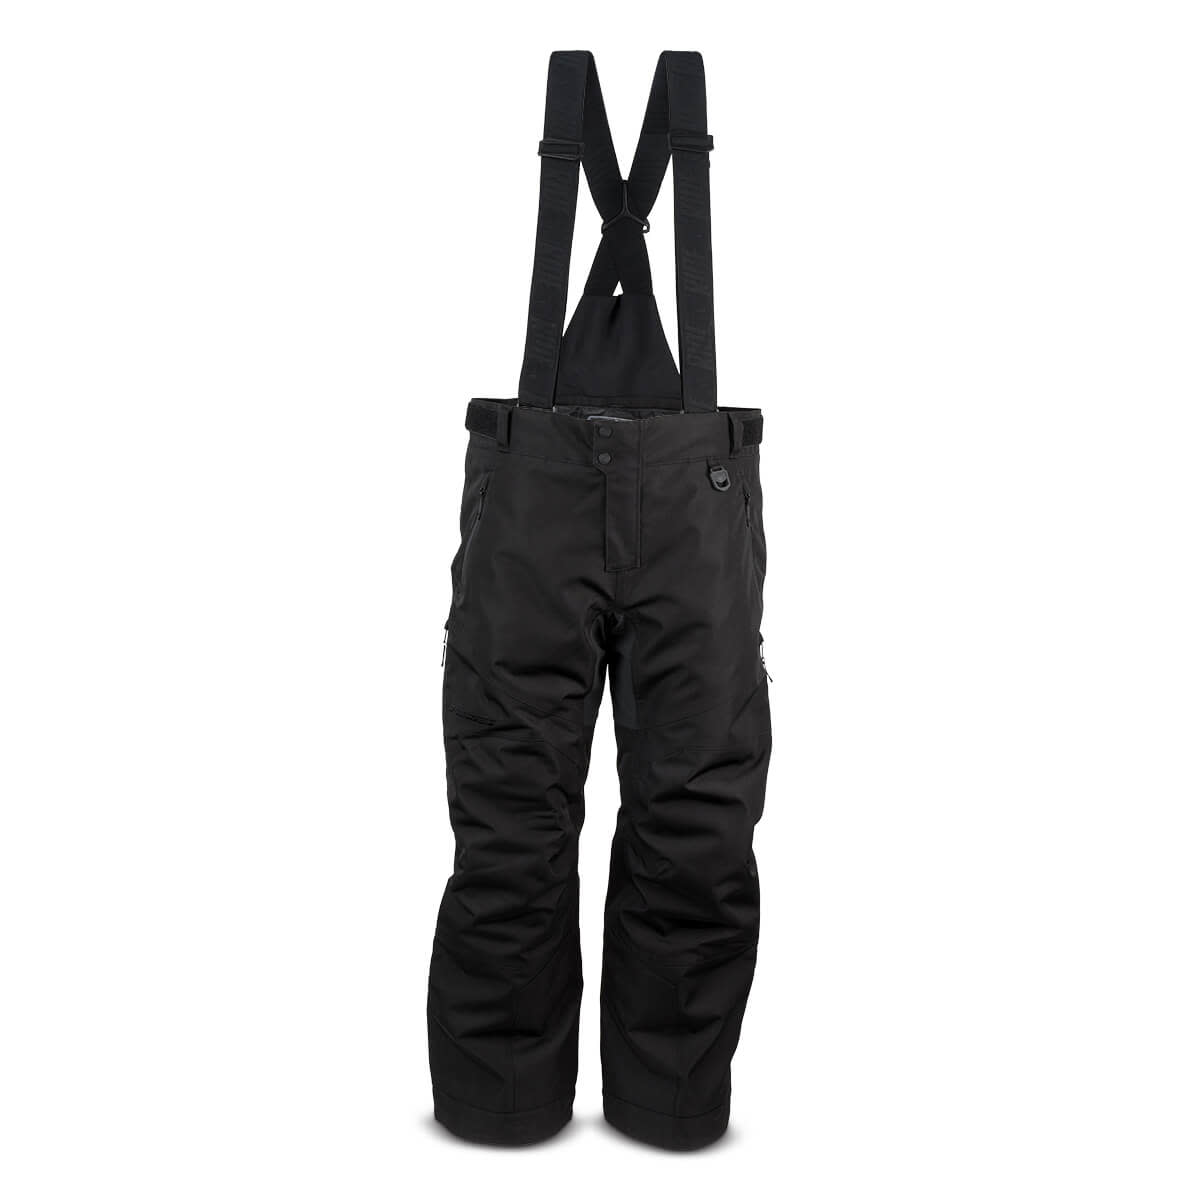 509 insulated pants for men r 200 bib